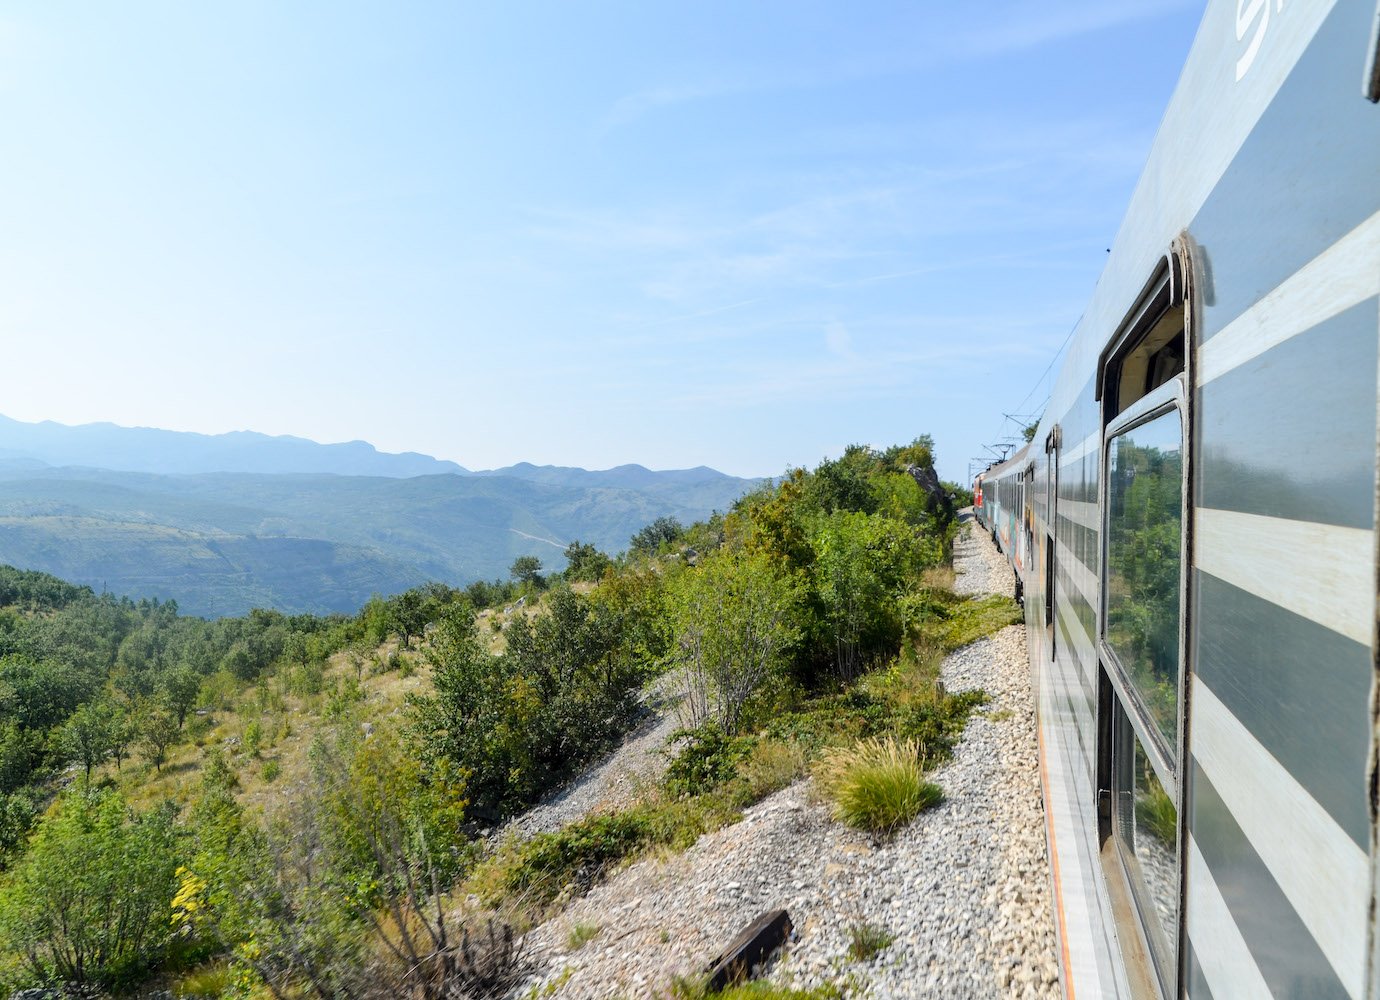 All aboard: 5 picturesque train journeys across Eastern Europe